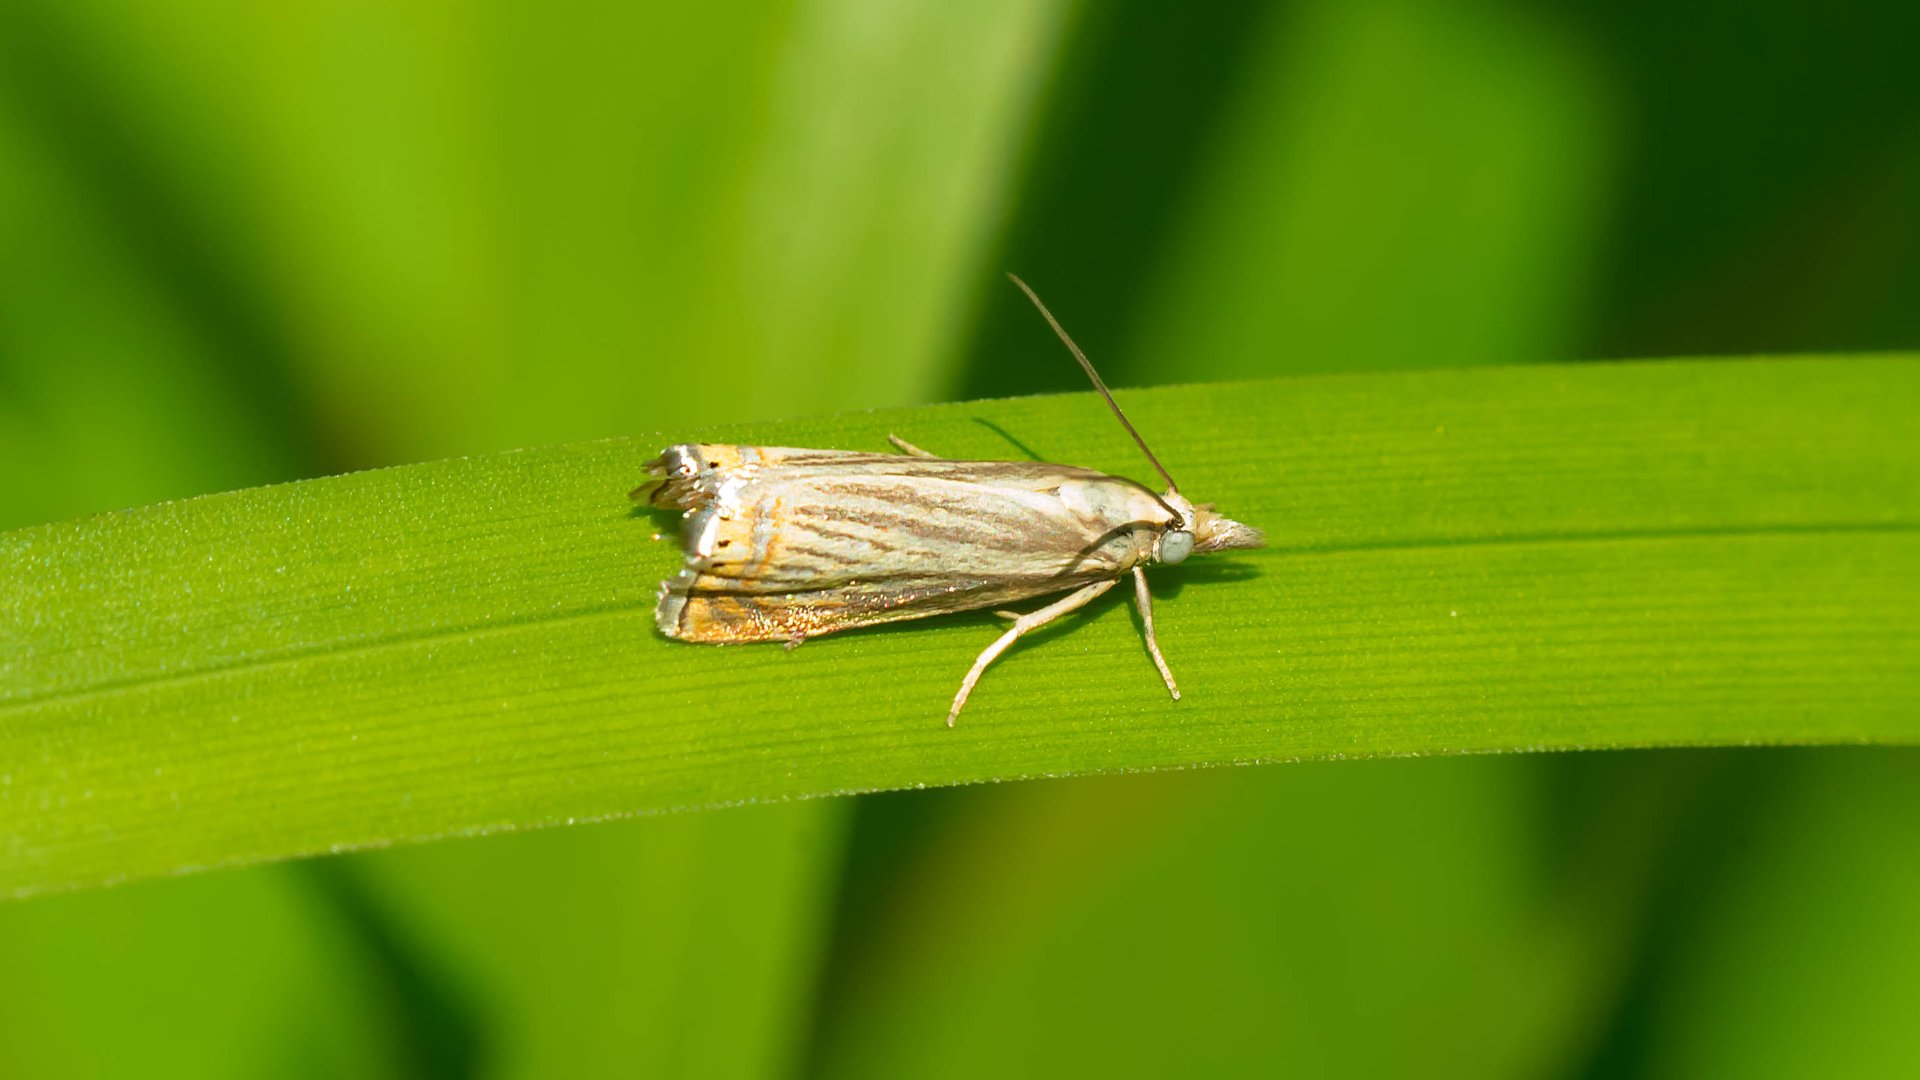 Here’s What You Should Do if Sod Webworms Have Infested Your Lawn